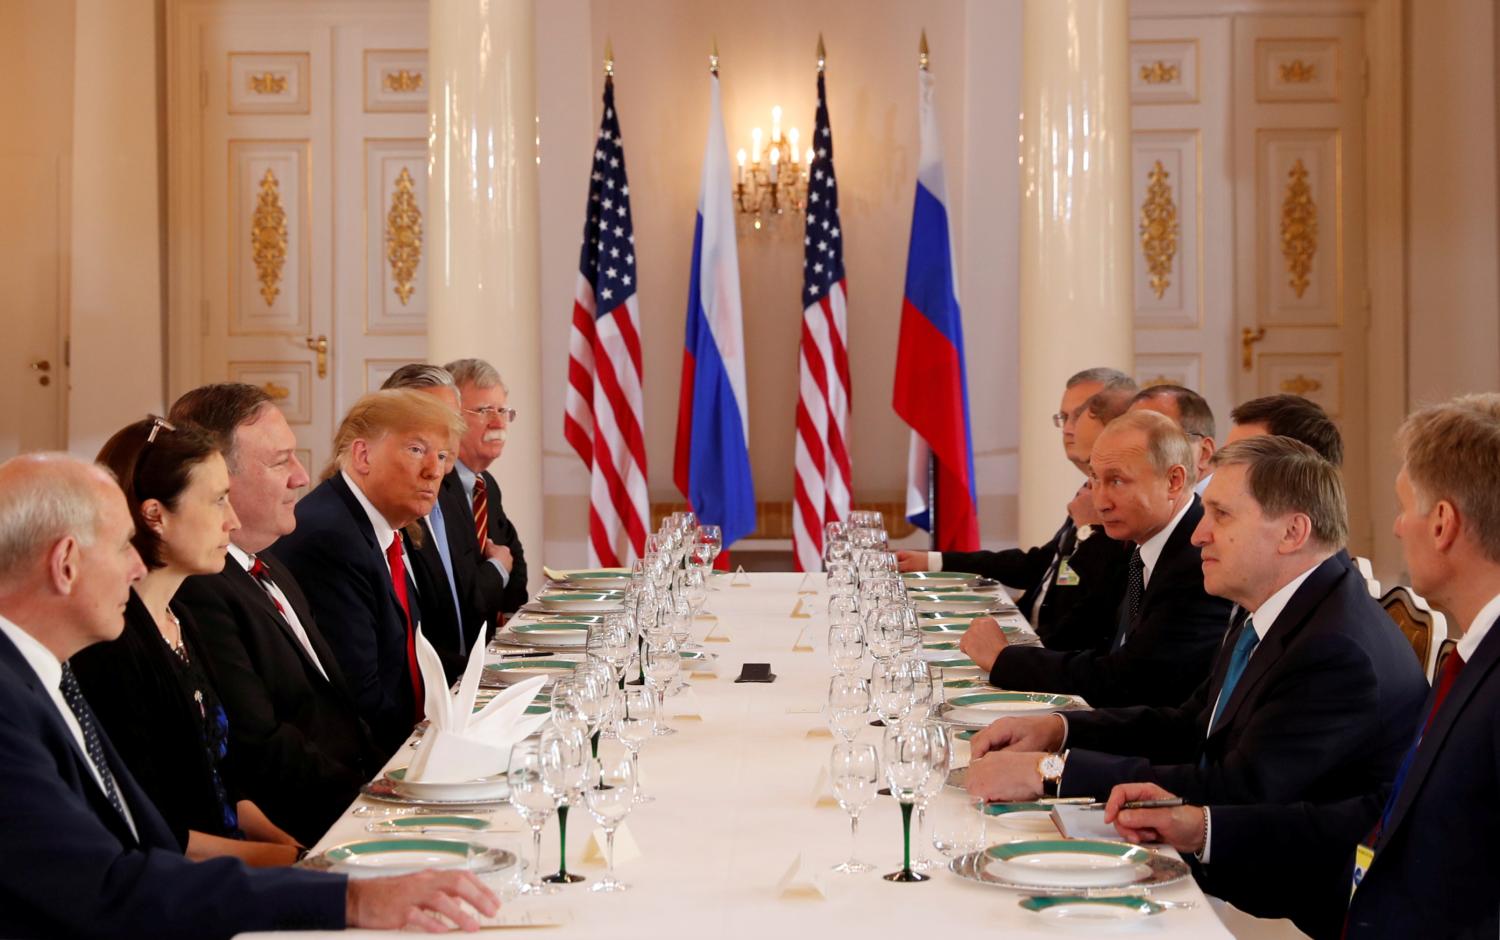 U.S. President Donald Trump participates in an expanded bilateral meeting with Russia's President Vladimir Putin in Helsinki, Finland, July 16, 2018. REUTERS/Kevin Lamarque     TPX IMAGES OF THE DAY - RC1497F0B200